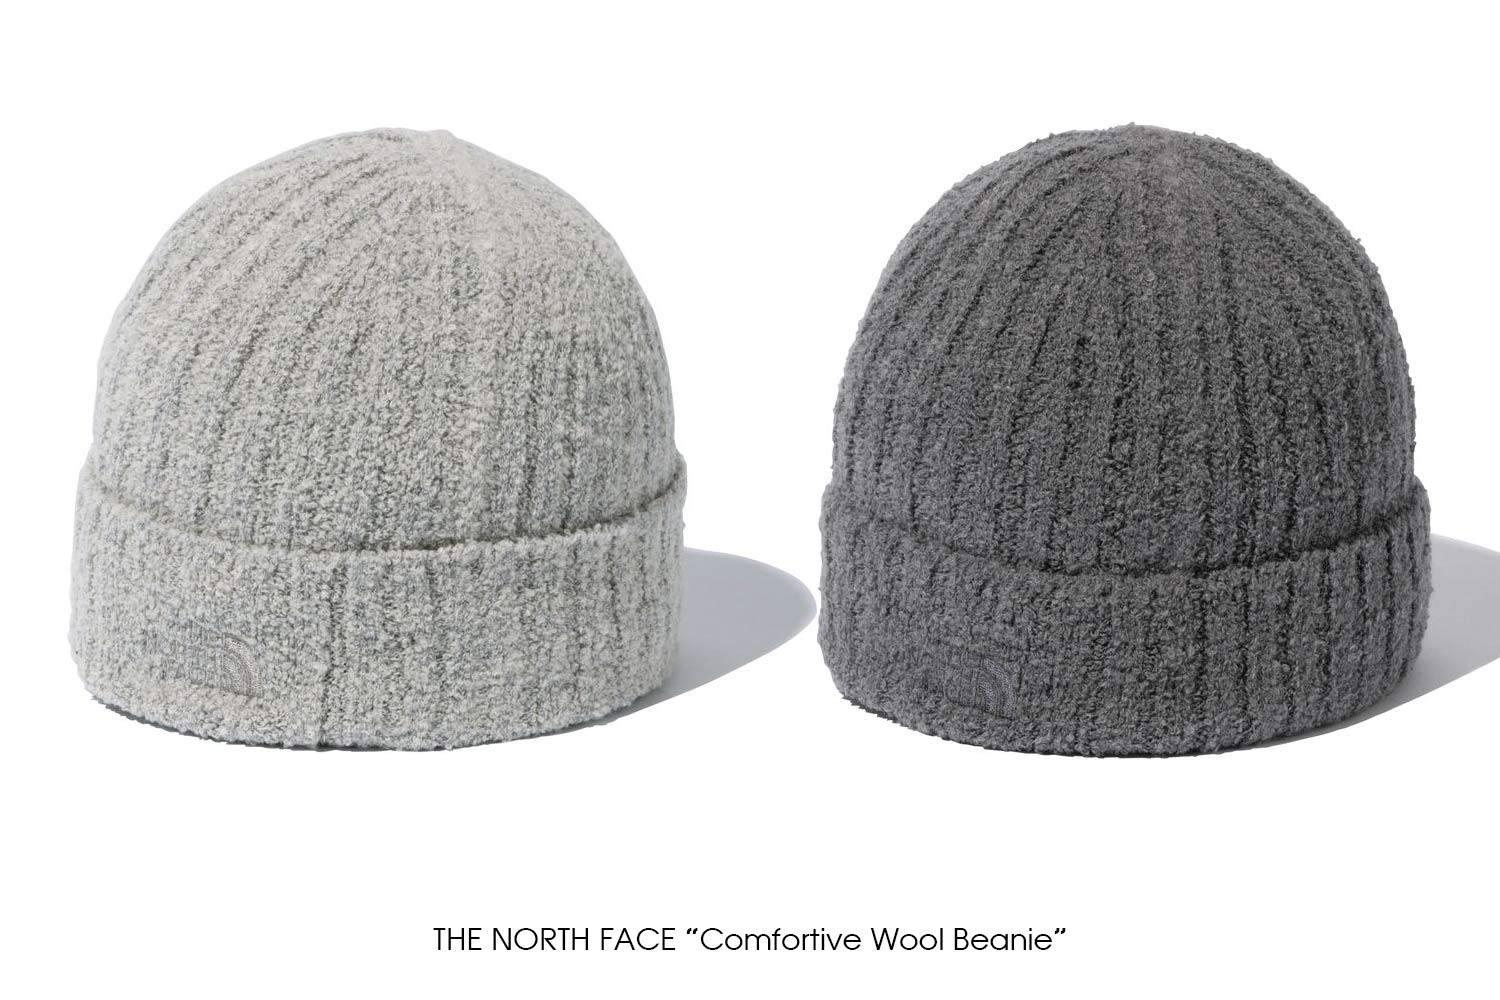 THE NORTH FACE "Comfortive Wool Beanie"